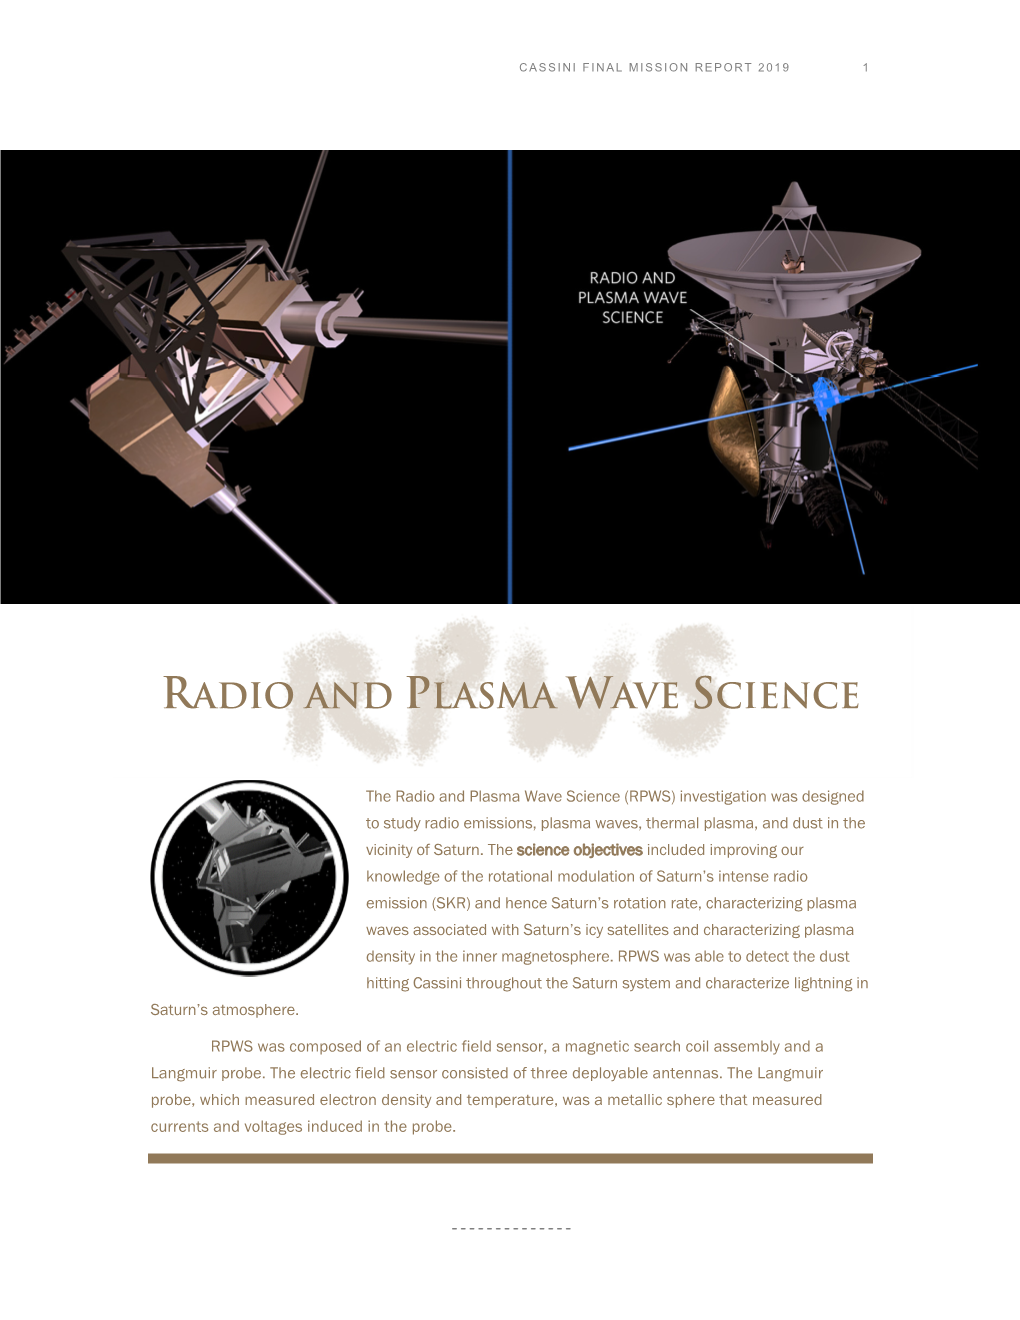 RPWS) Investigation Was Designed to Study Radio Emissions, Plasma Waves, Thermal Plasma, and Dust in the Vicinity of Saturn